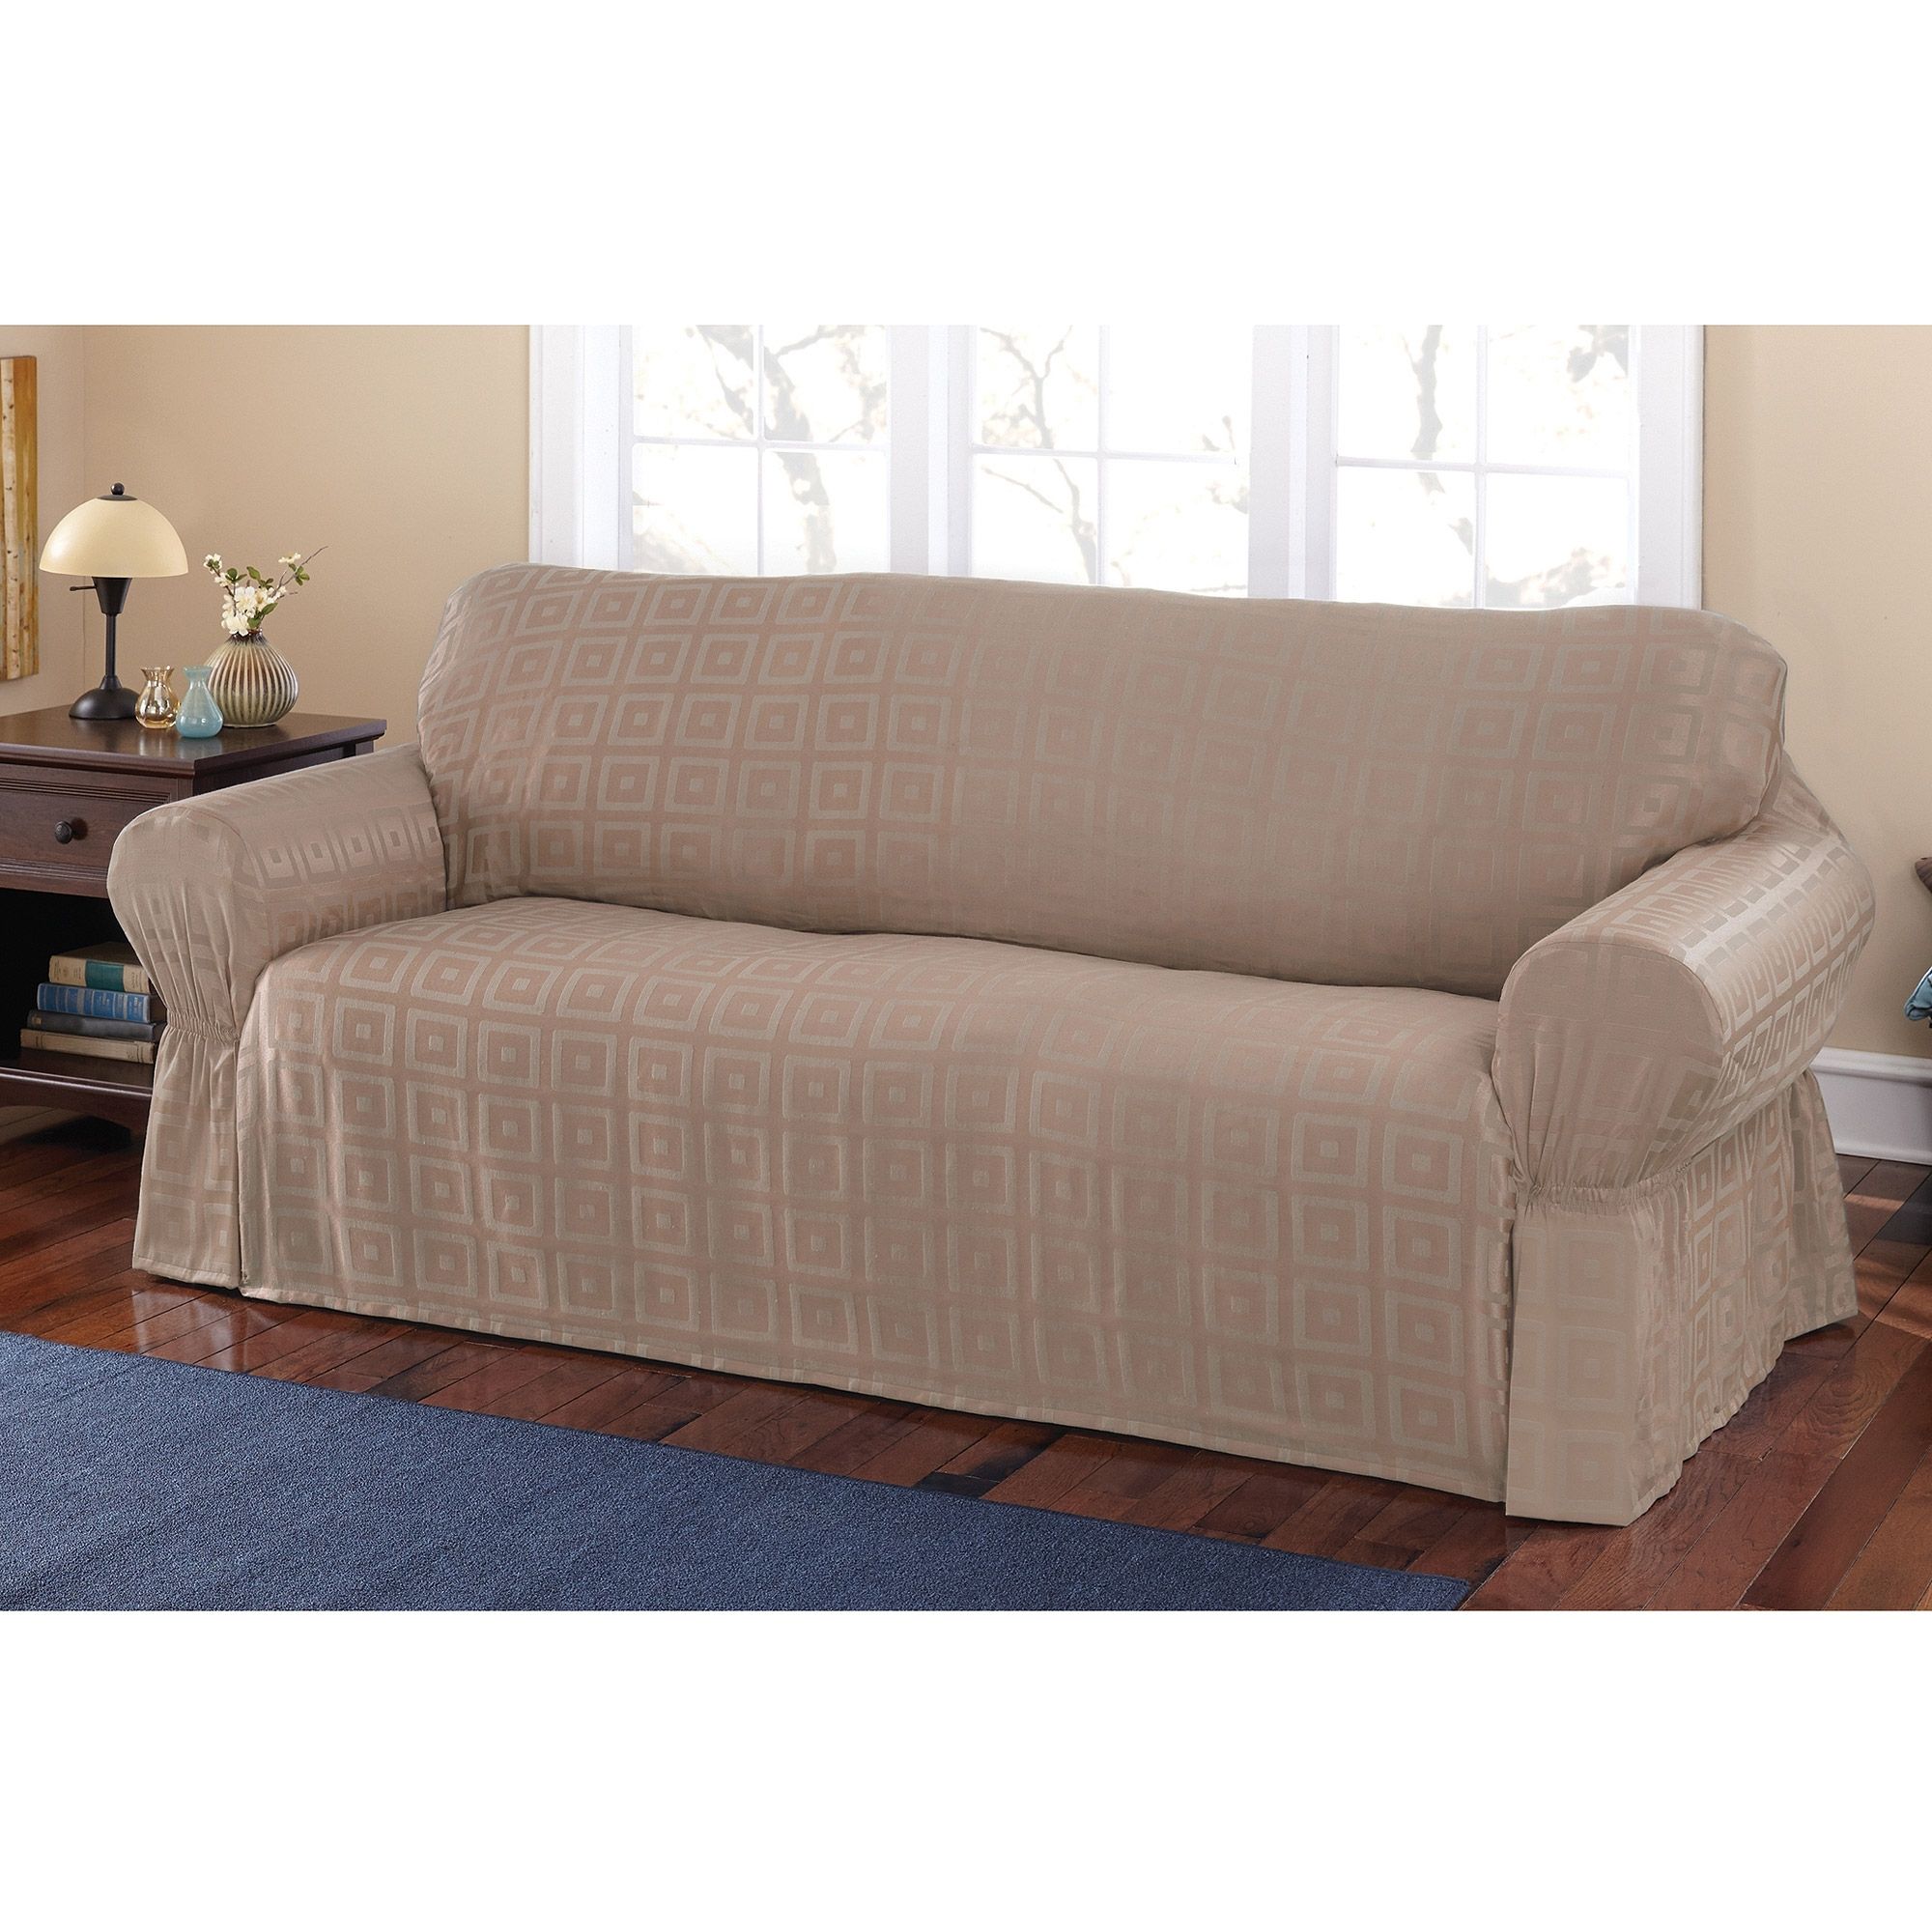 Popular Mainstays Sherwood Slipcover Sofa – Walmart Intended For Sectional Sofas With Covers (View 16 of 20)